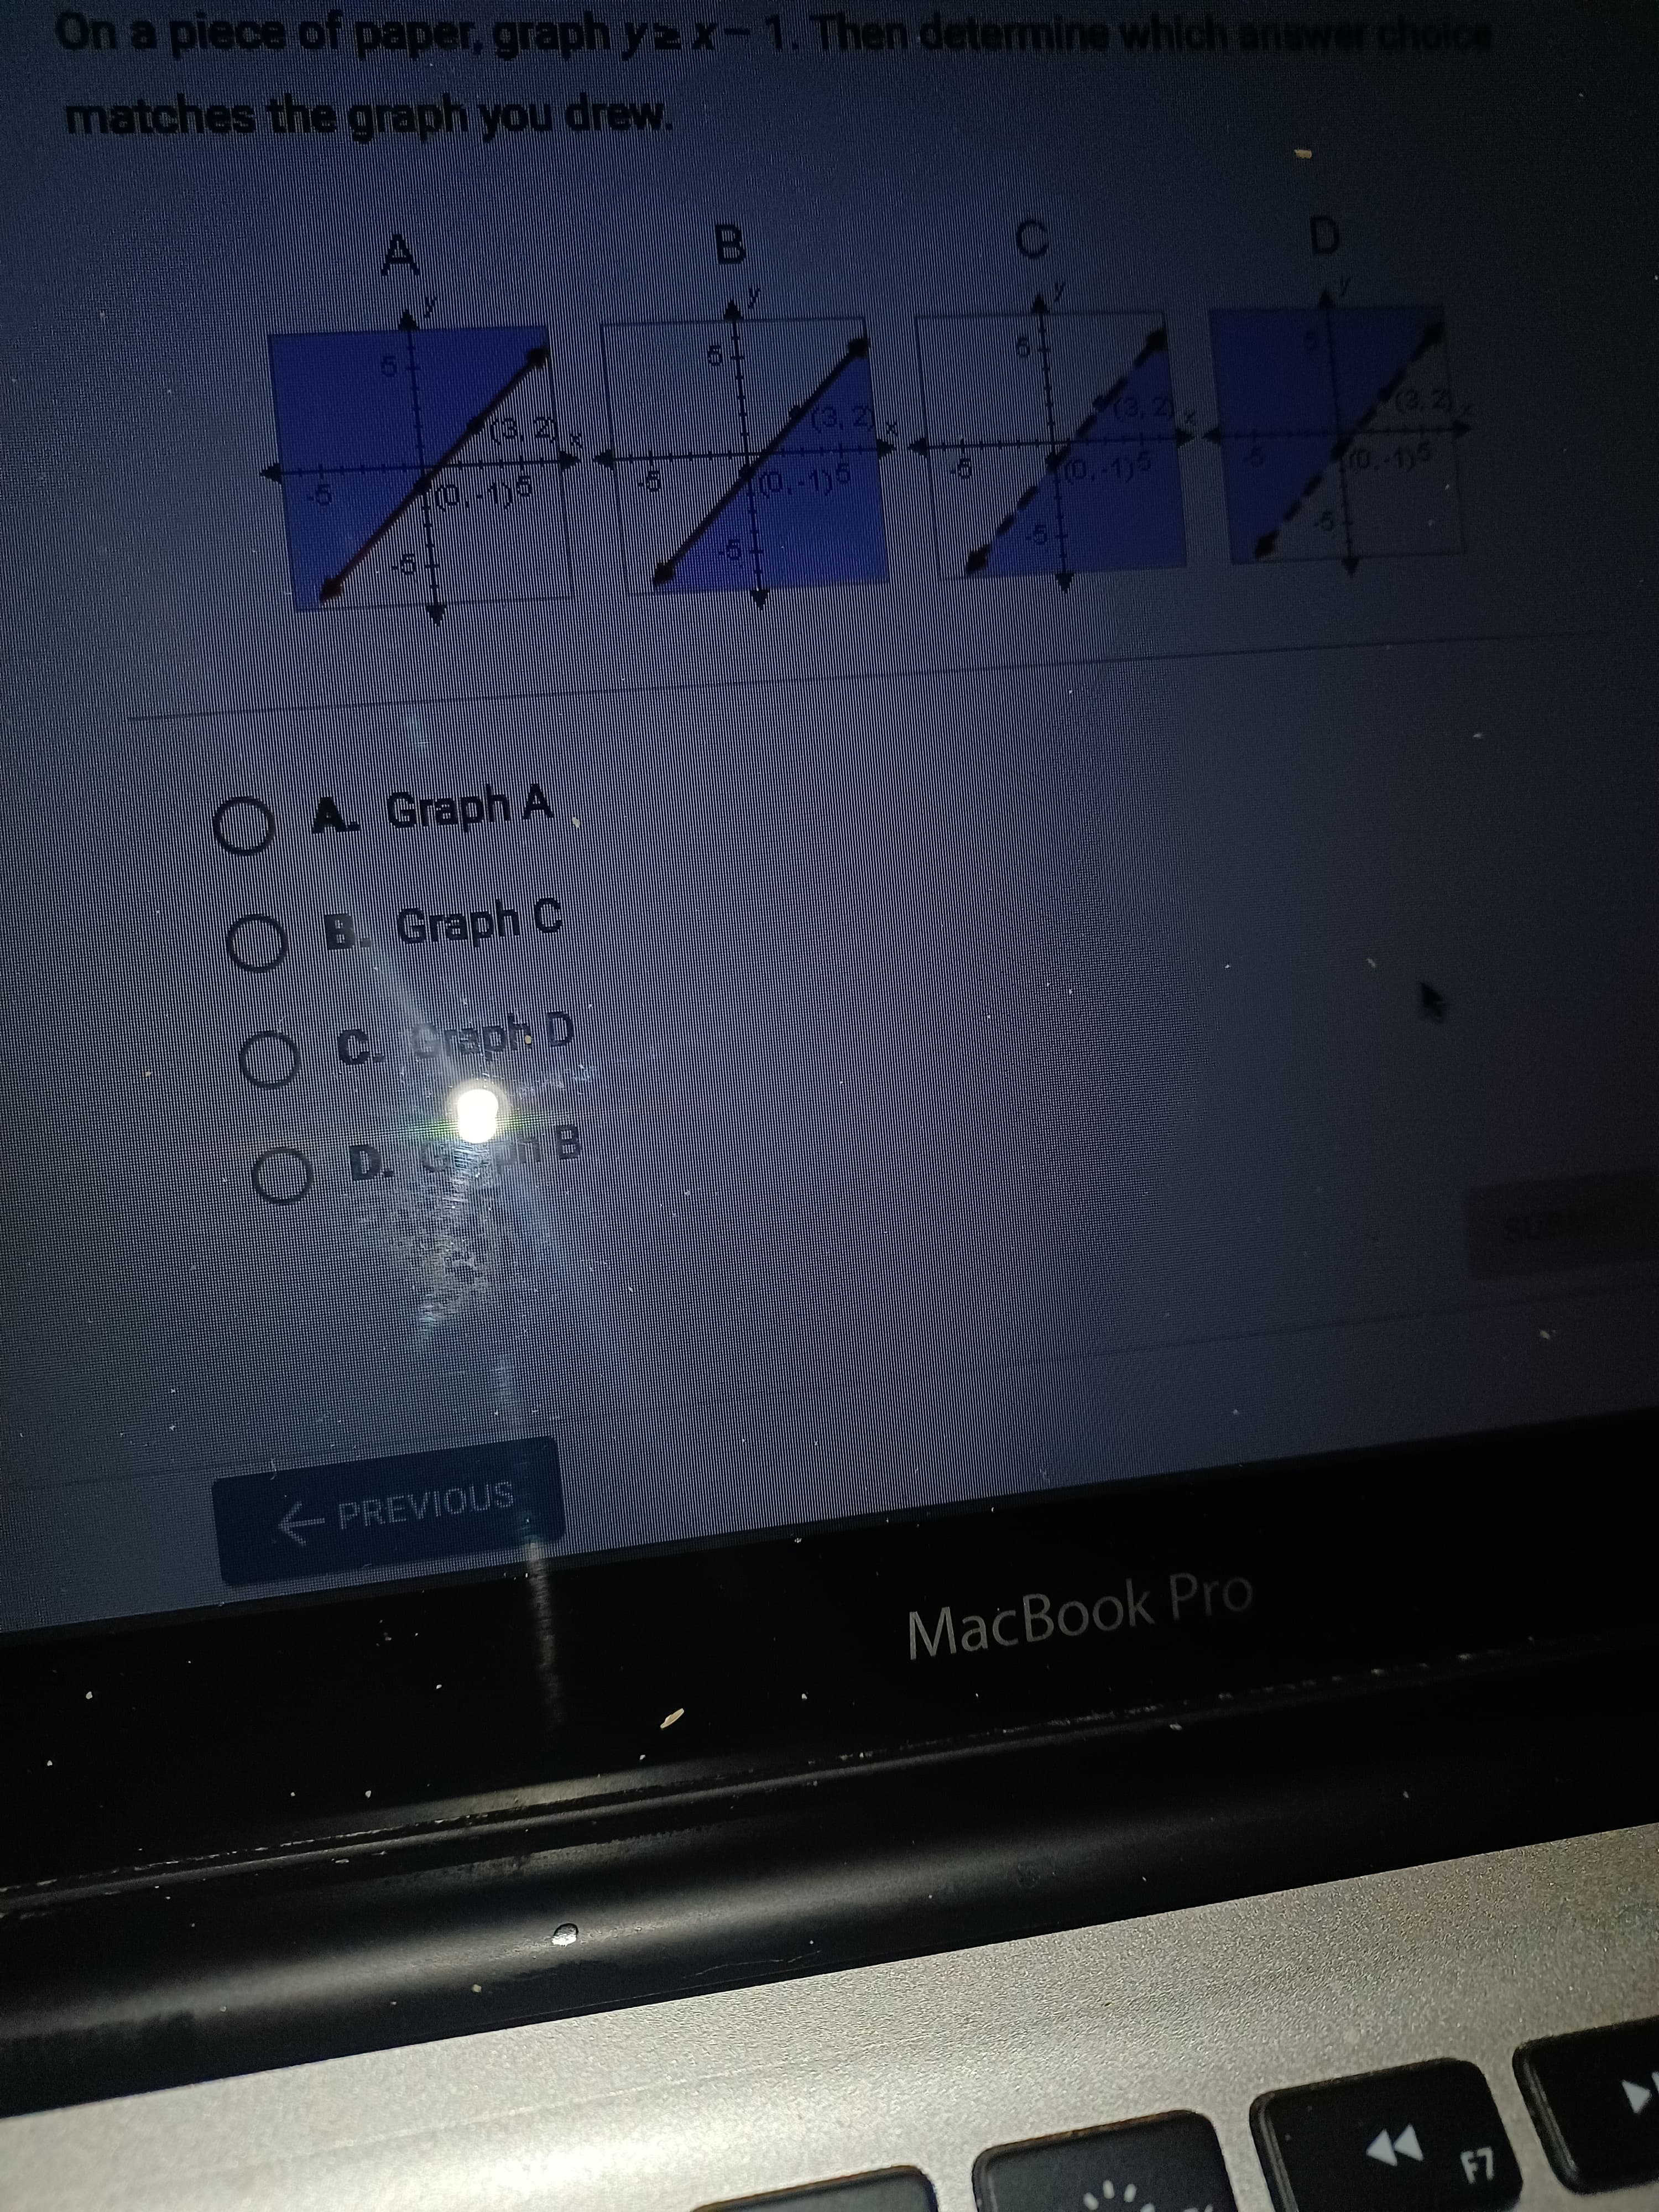 47
On a piece of paper, graph y2x-1.Then determine which answerchoic
matches the graph you drew.
(0,-1)5
Graph A
O B. Graph C
PREVIOUS
MacBook Pro
